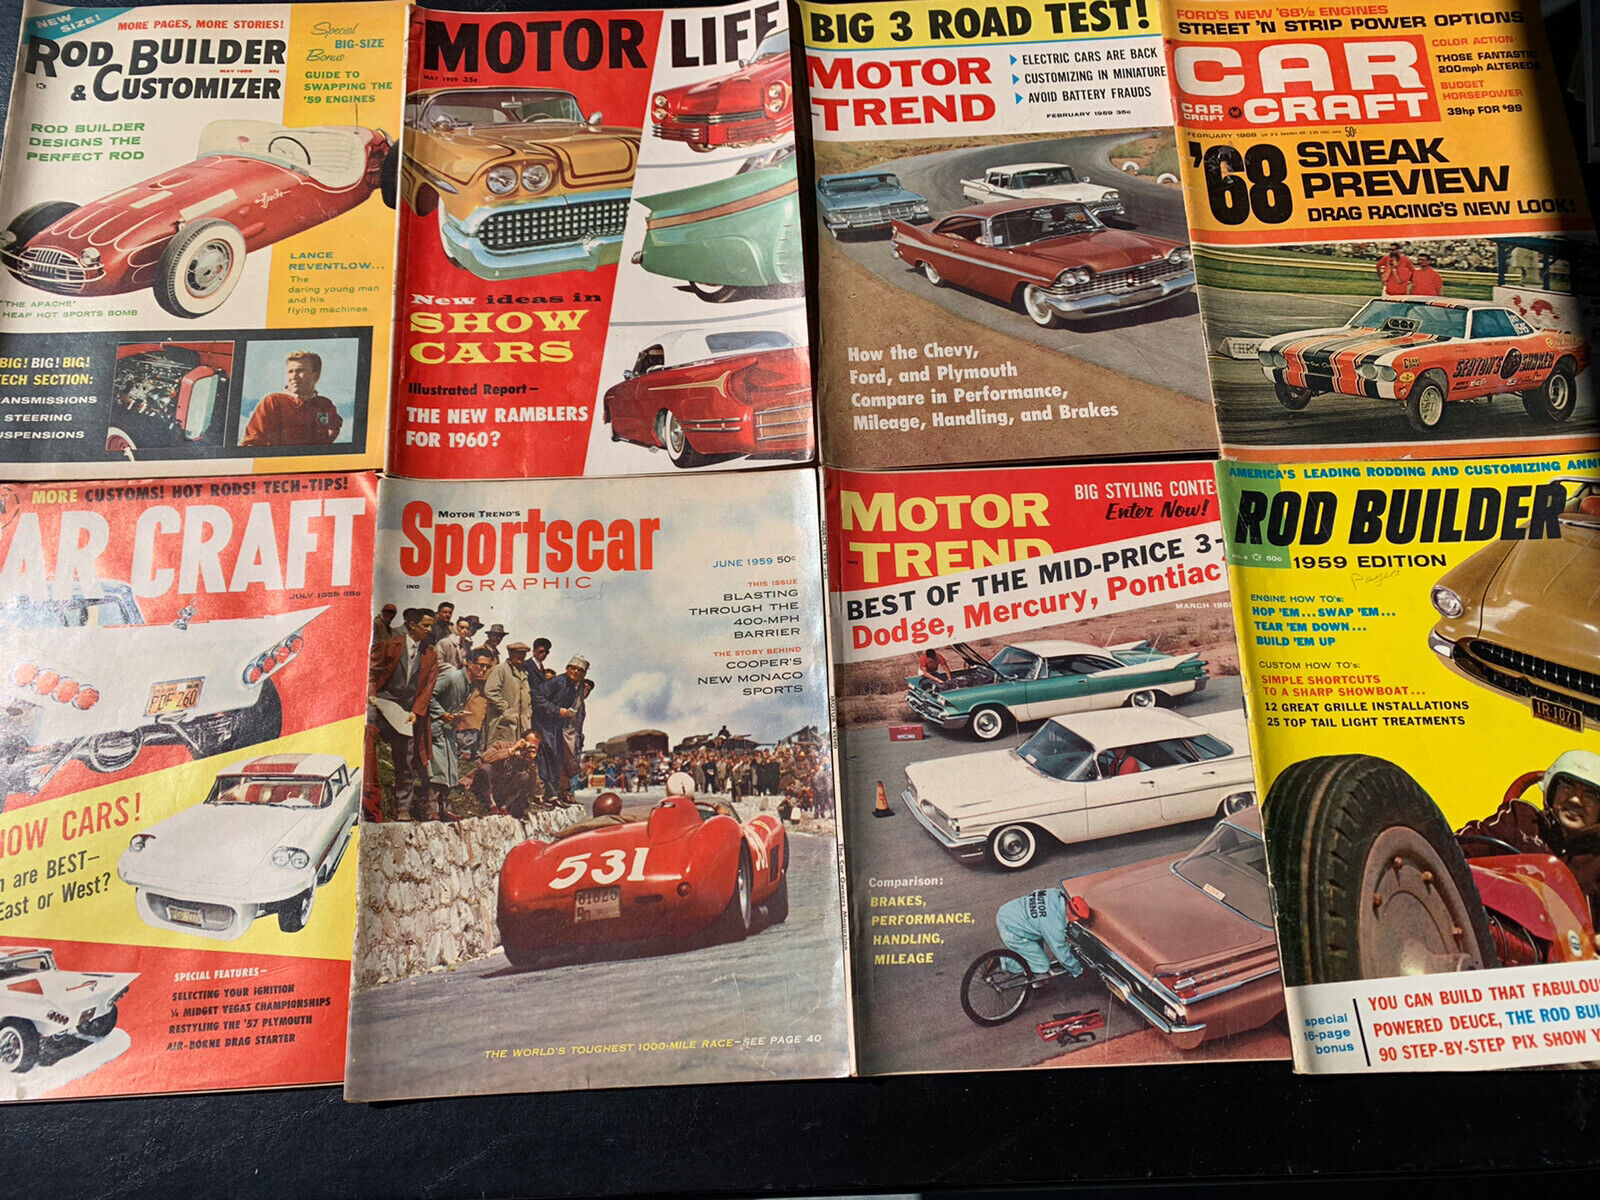 MOTOR TREND Car Craft SPORTS CAR Motor Life 1950s/60s CLEAN Magazines 